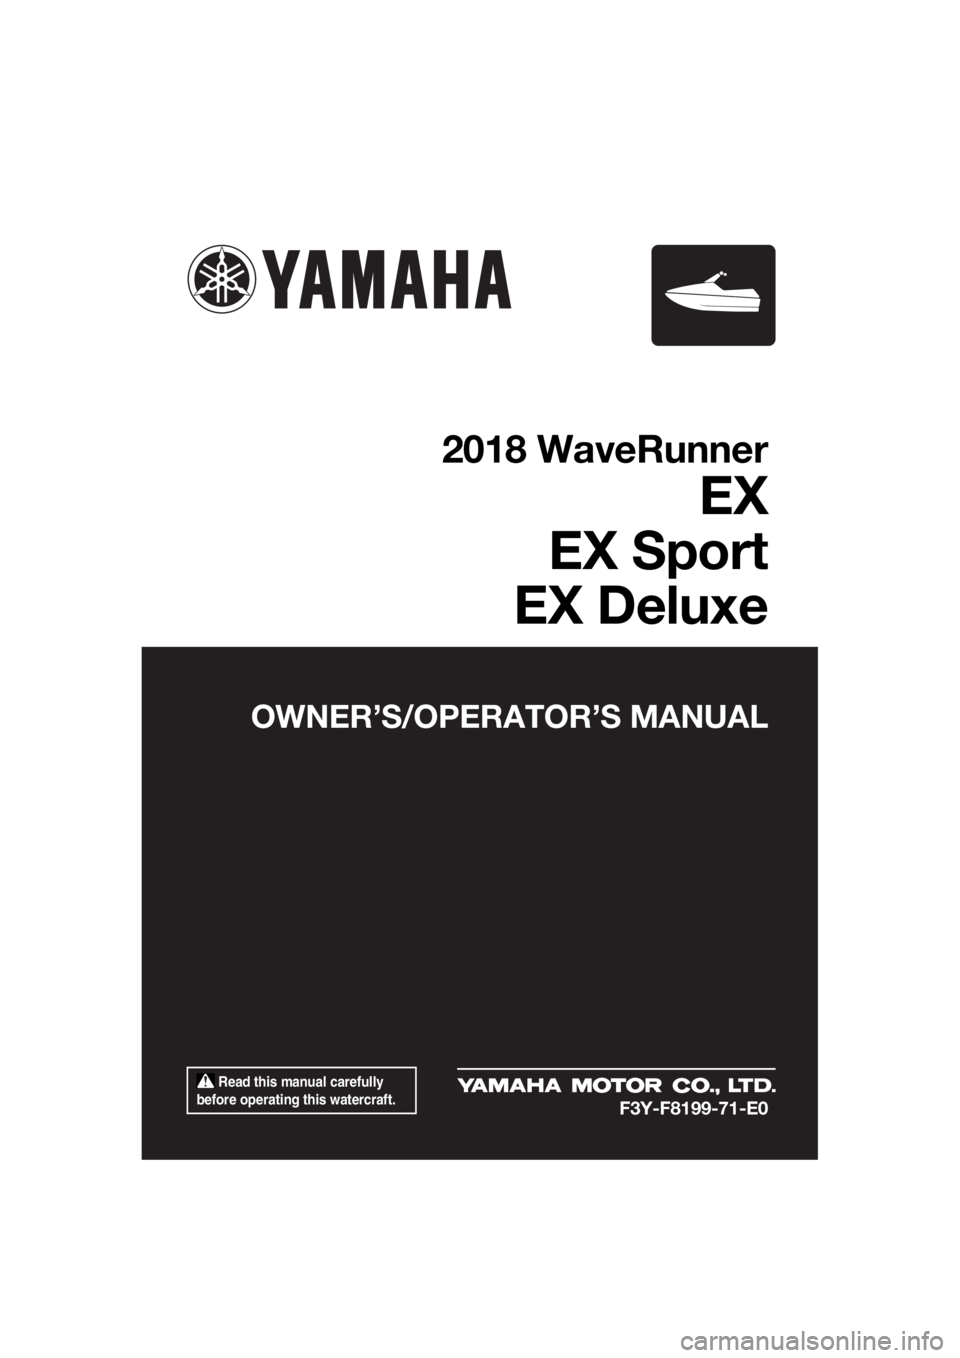 YAMAHA EX 2018  Owners Manual  Read this manual carefully 
before operating this watercraft.
OWNER’S/OPERATOR’S MANUAL
2018 WaveRunner
EX
EX Sport
EX Deluxe
F3Y-F8199-71-E0
UF3Y71E0.book  Page 1  Thursday, May 25, 2017  11:17 